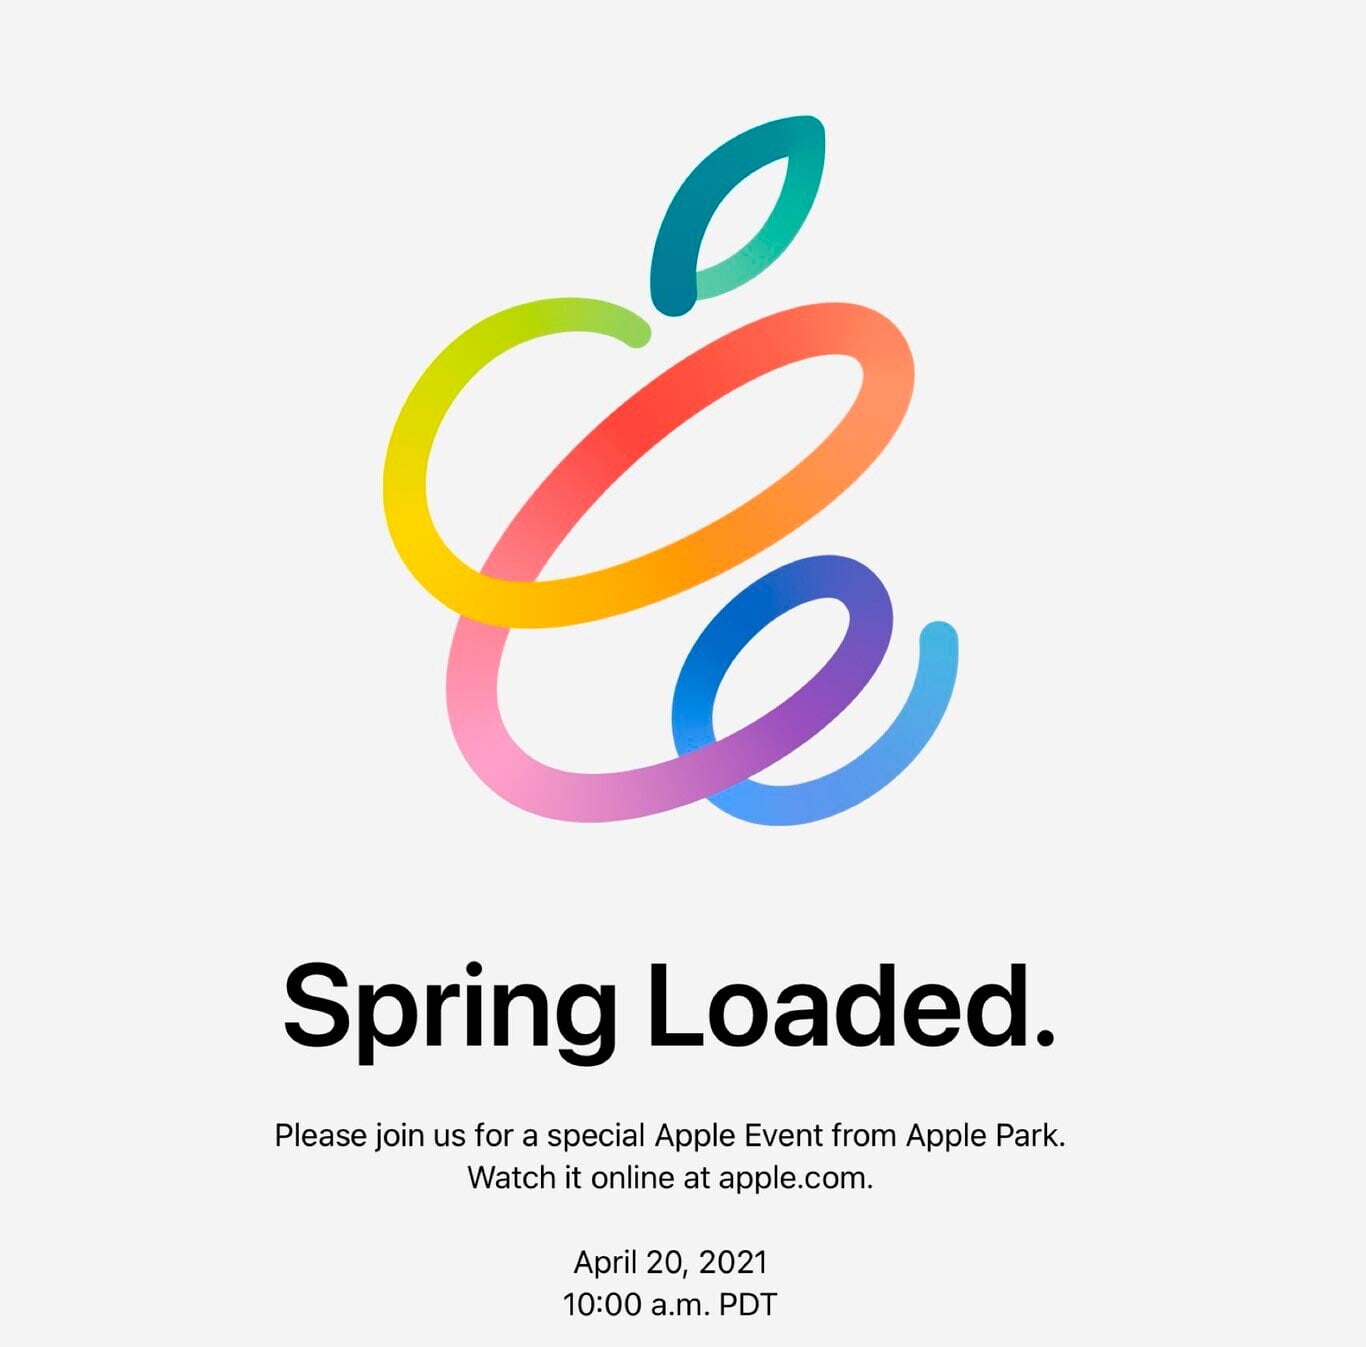 Apple's next keynote Spring Loaded will be held on April 20th